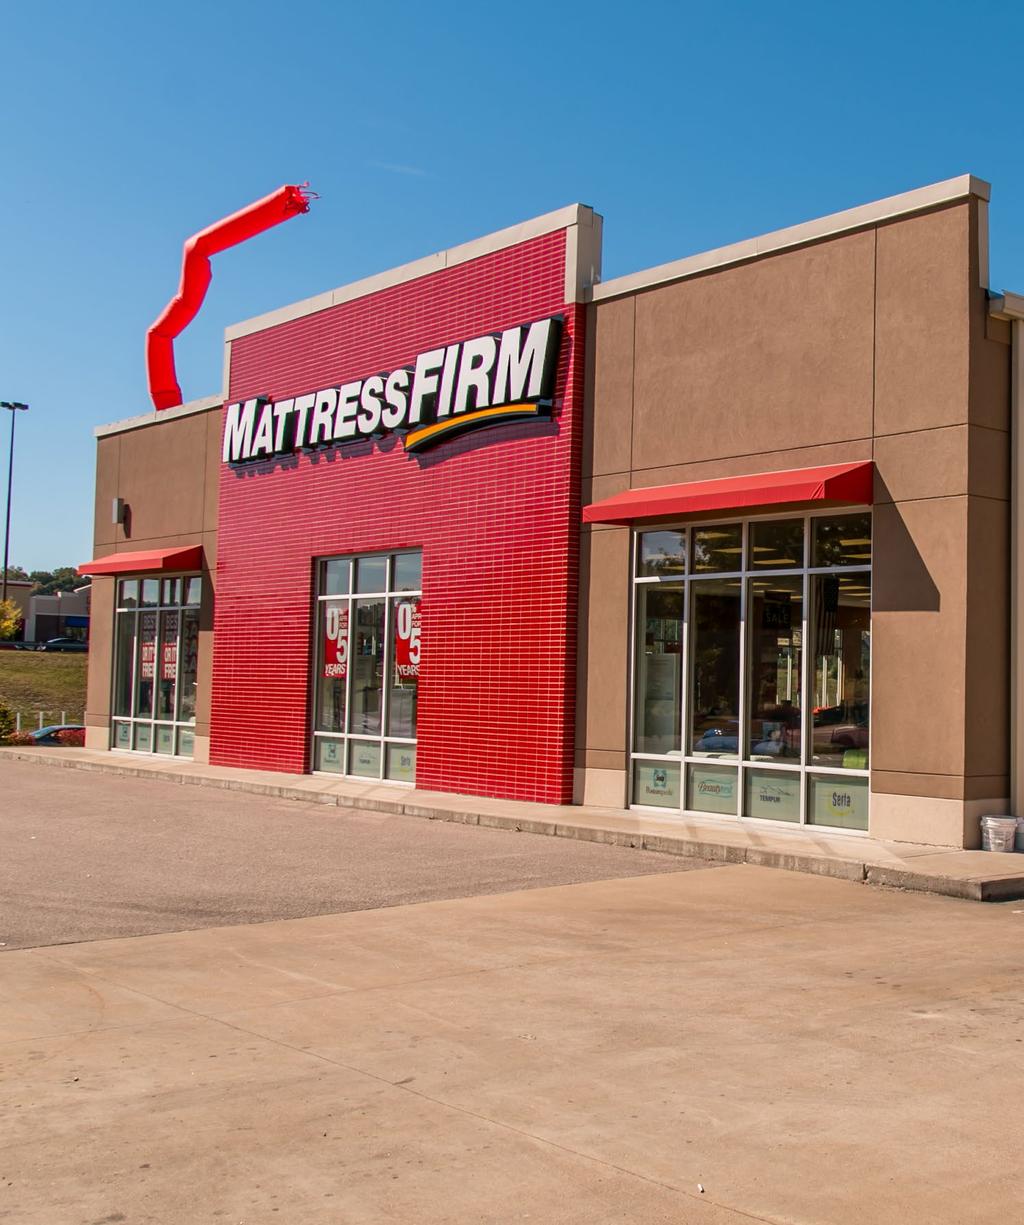 Tenant Overview - Mattress Firm With more than 3,600 company-operated and franchised stores across 49 states, Mattress Firm has the largest geographic footprint in the United States among